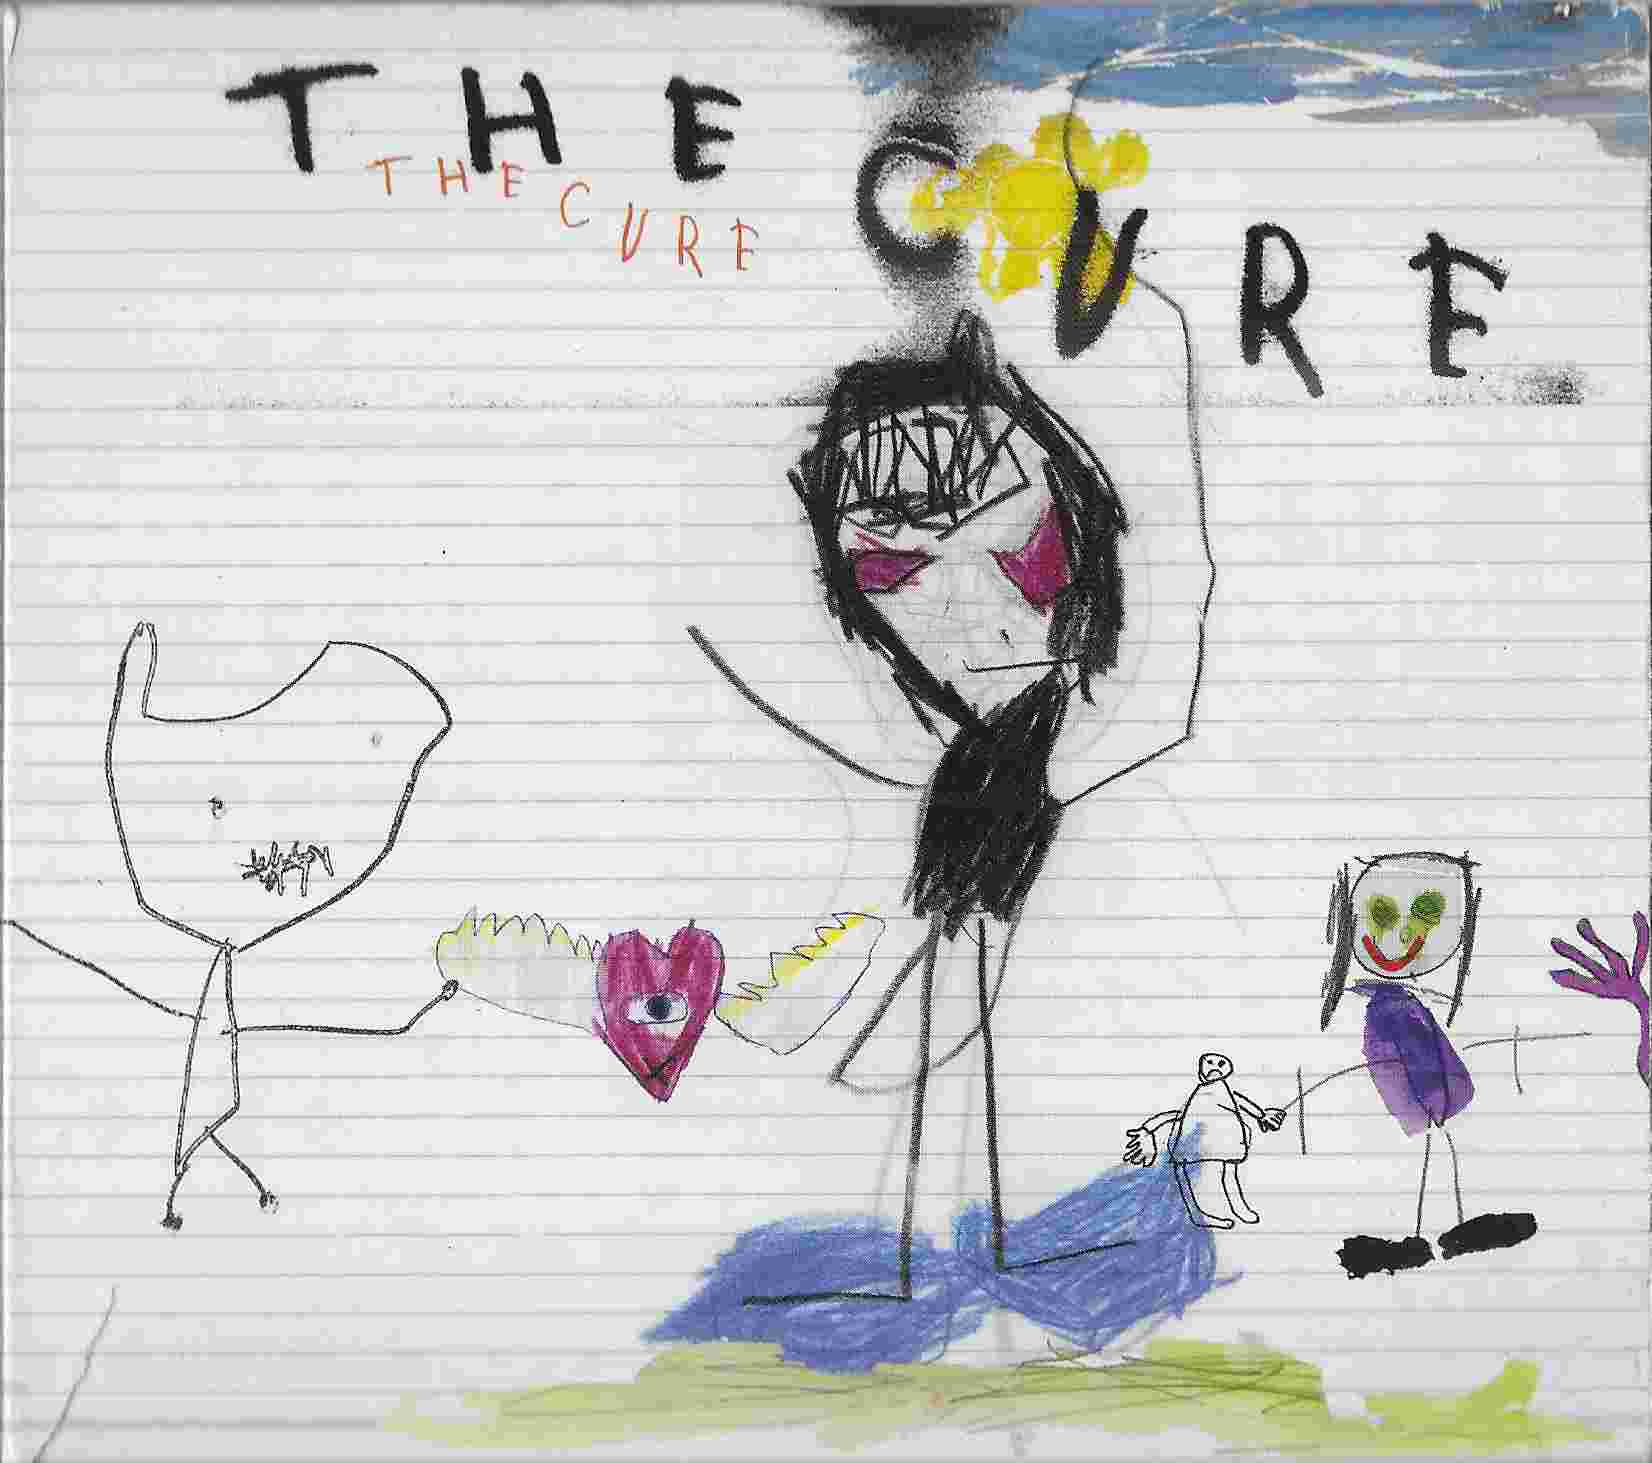 Picture of The Cure by artist The Cure  